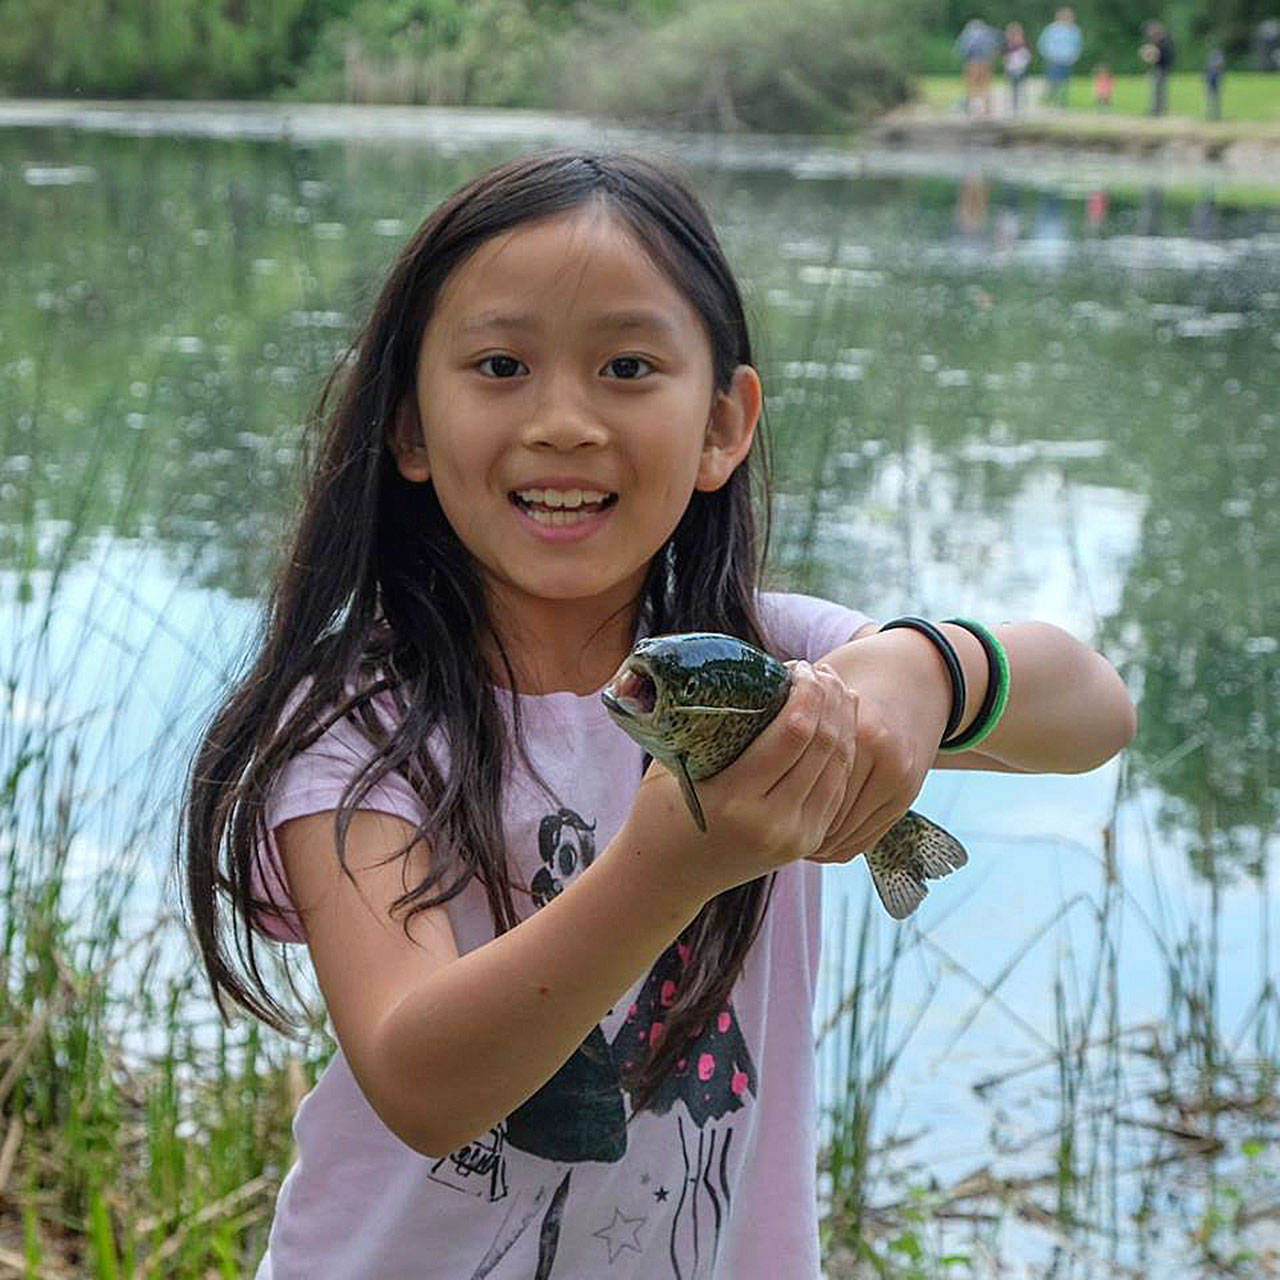 Kids got a chance to catch a fish at the May 12 event at the Old Fishing Hole. The city of Kent and the Rotary Club made the event possible. COURTESY PHOTO